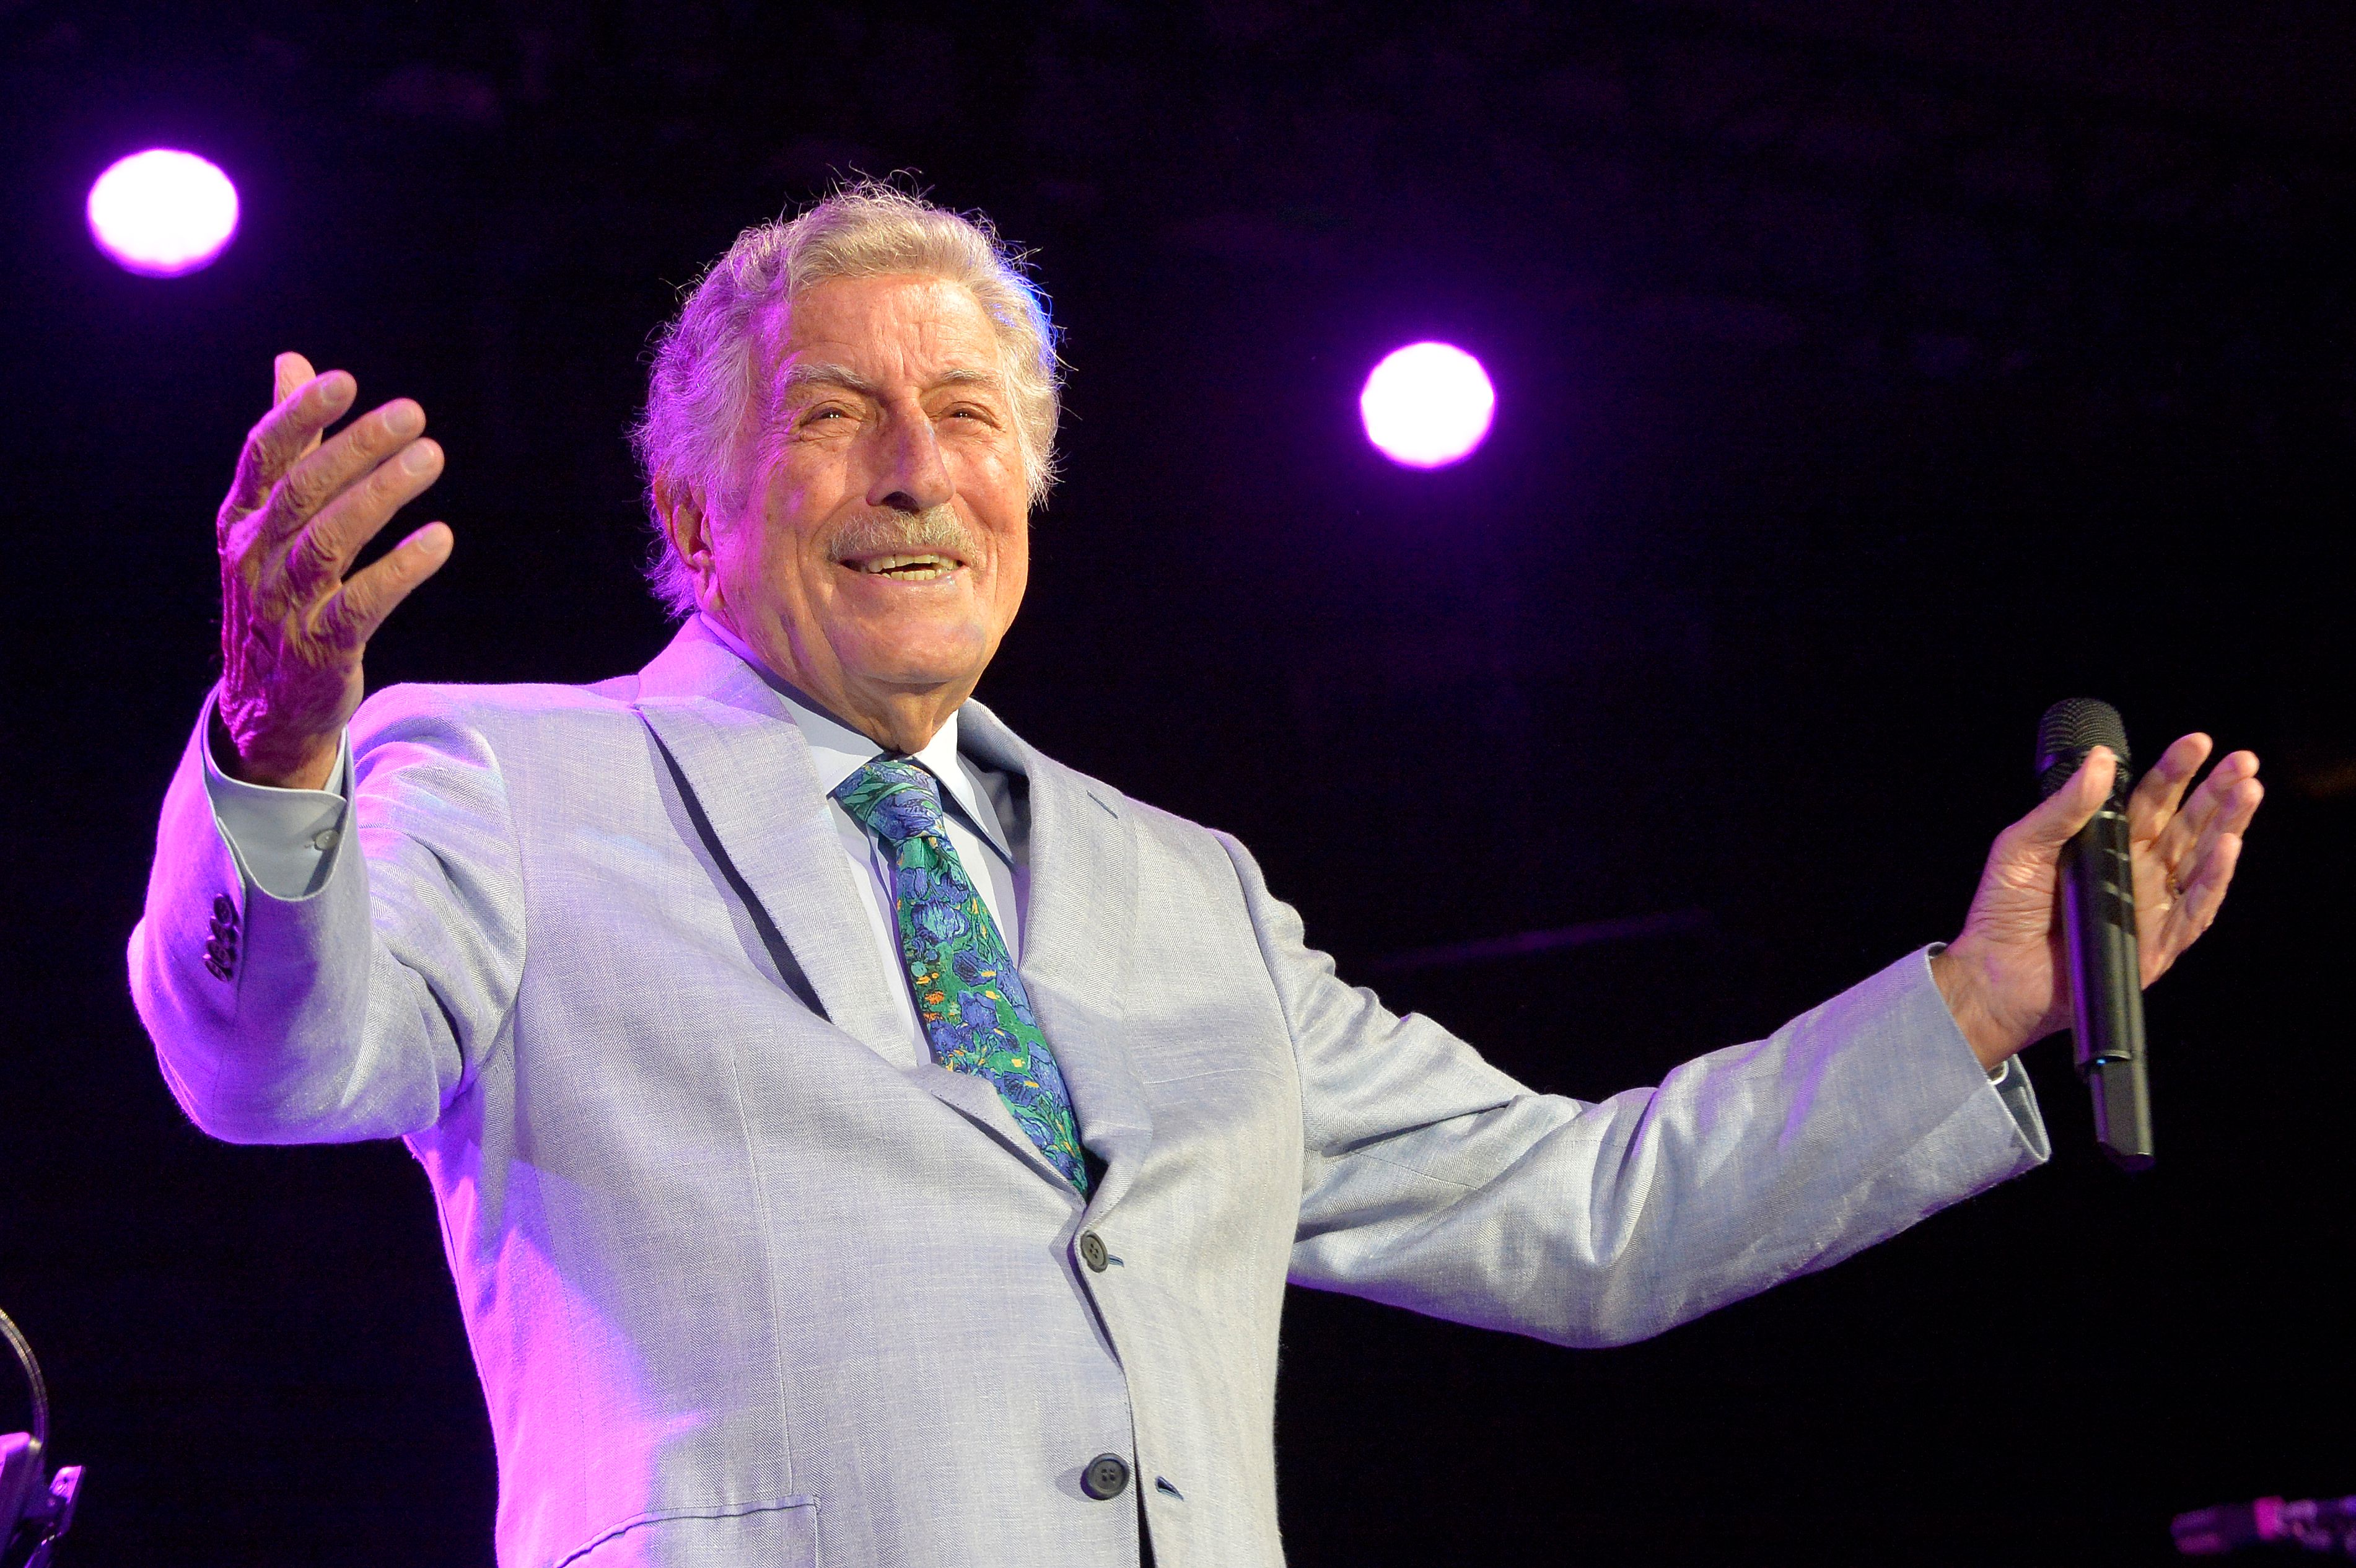 Tony Bennett performing on stage during an invitation-only concert at Encore Boston Harbor Casino in Everett, Massachusetts, on August 8, 2019 | Source: Getty Images